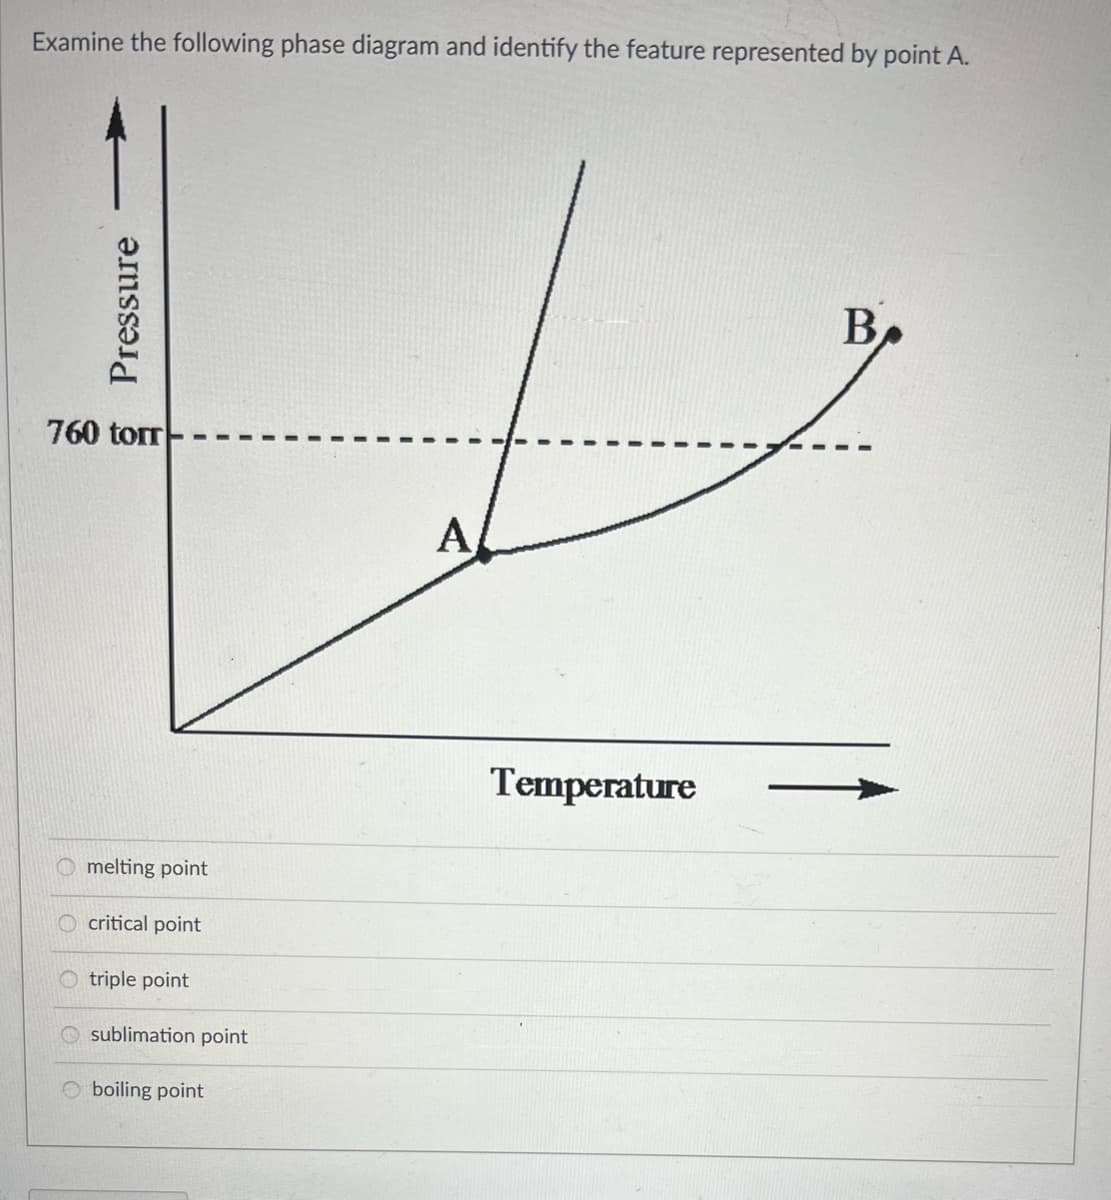 Examine the following phase diagram and identify the feature represented by point A.
Pressure
760 torr
melting point
O critical point
Otriple point
sublimation point
boiling point
A
Temperature
B